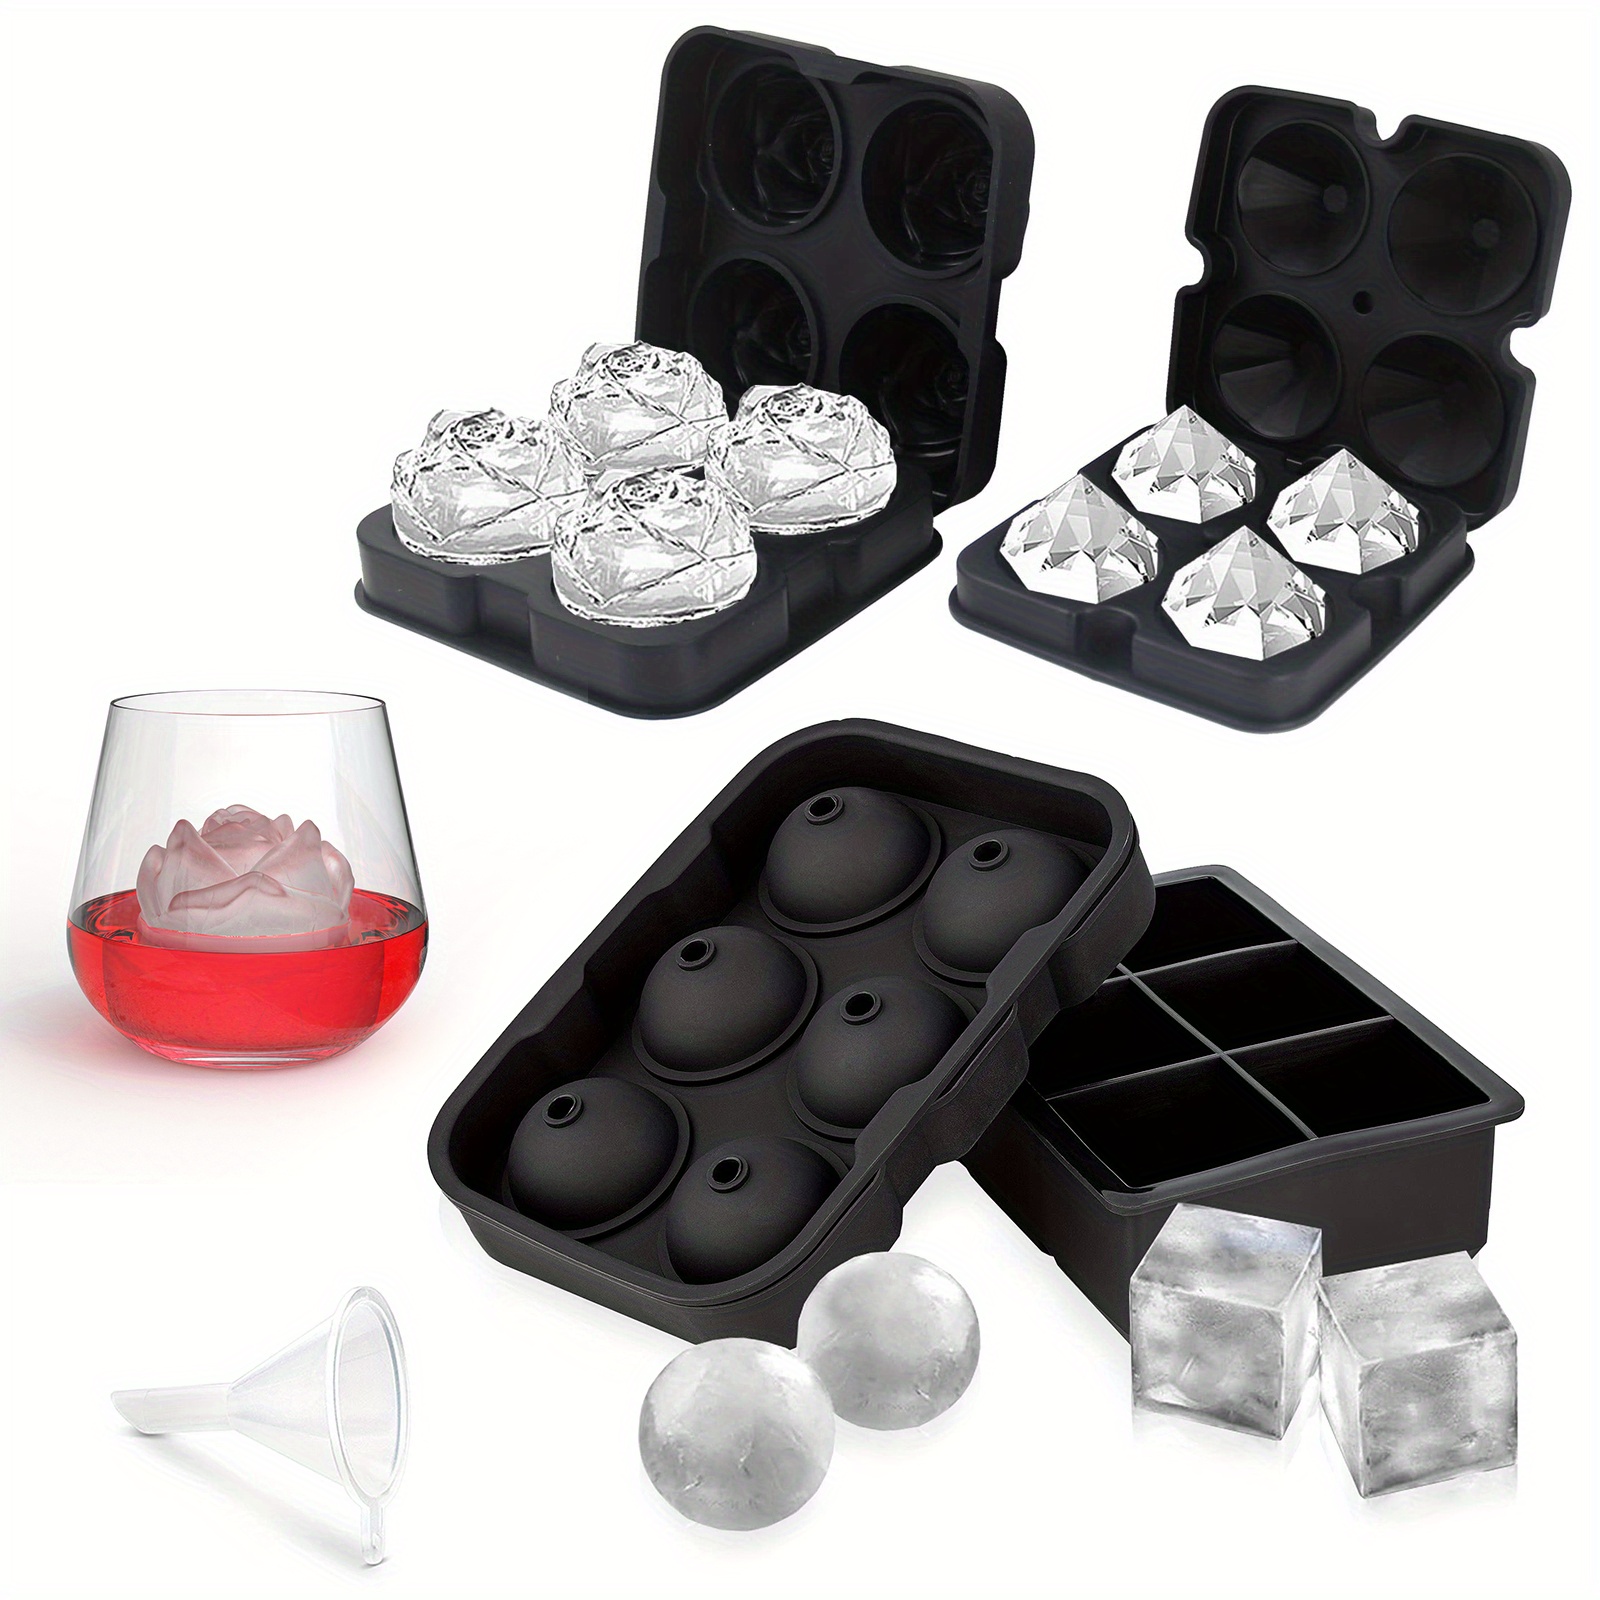 3D Rose Ice Molds Large Ice Cube Trays Make 4 Giant Cute Flower Shape Ice  Silicone Big Ice Ball Maker